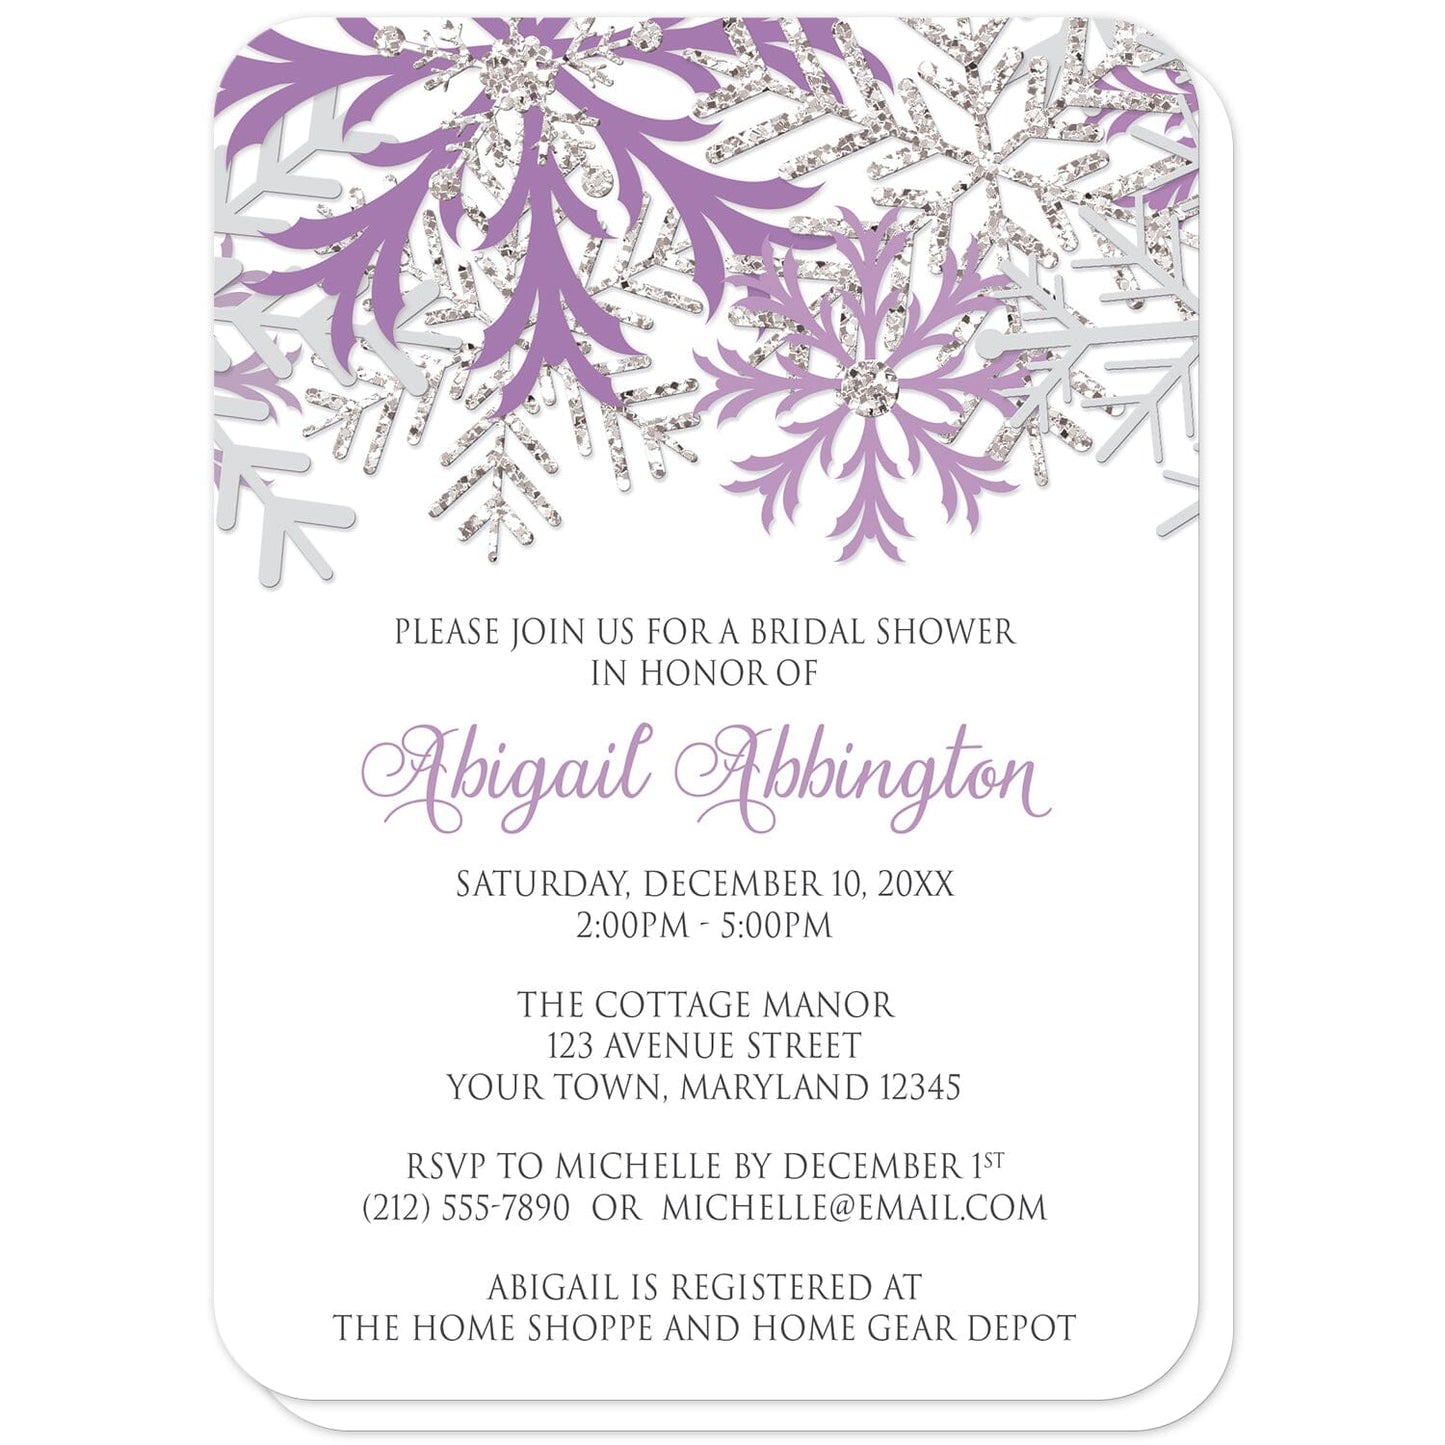 Winter Purple Silver Snowflake Bridal Shower Invitations (with rounded corners) at Artistically Invited. Beautiful winter purple silver snowflake bridal shower invitations designed with purple, light purple, silver-colored glitter-illustrated, and light gray snowflakes along the top over a white background. Your personalized bridal shower celebration details are custom printed in purple and gray below the pretty snowflakes.